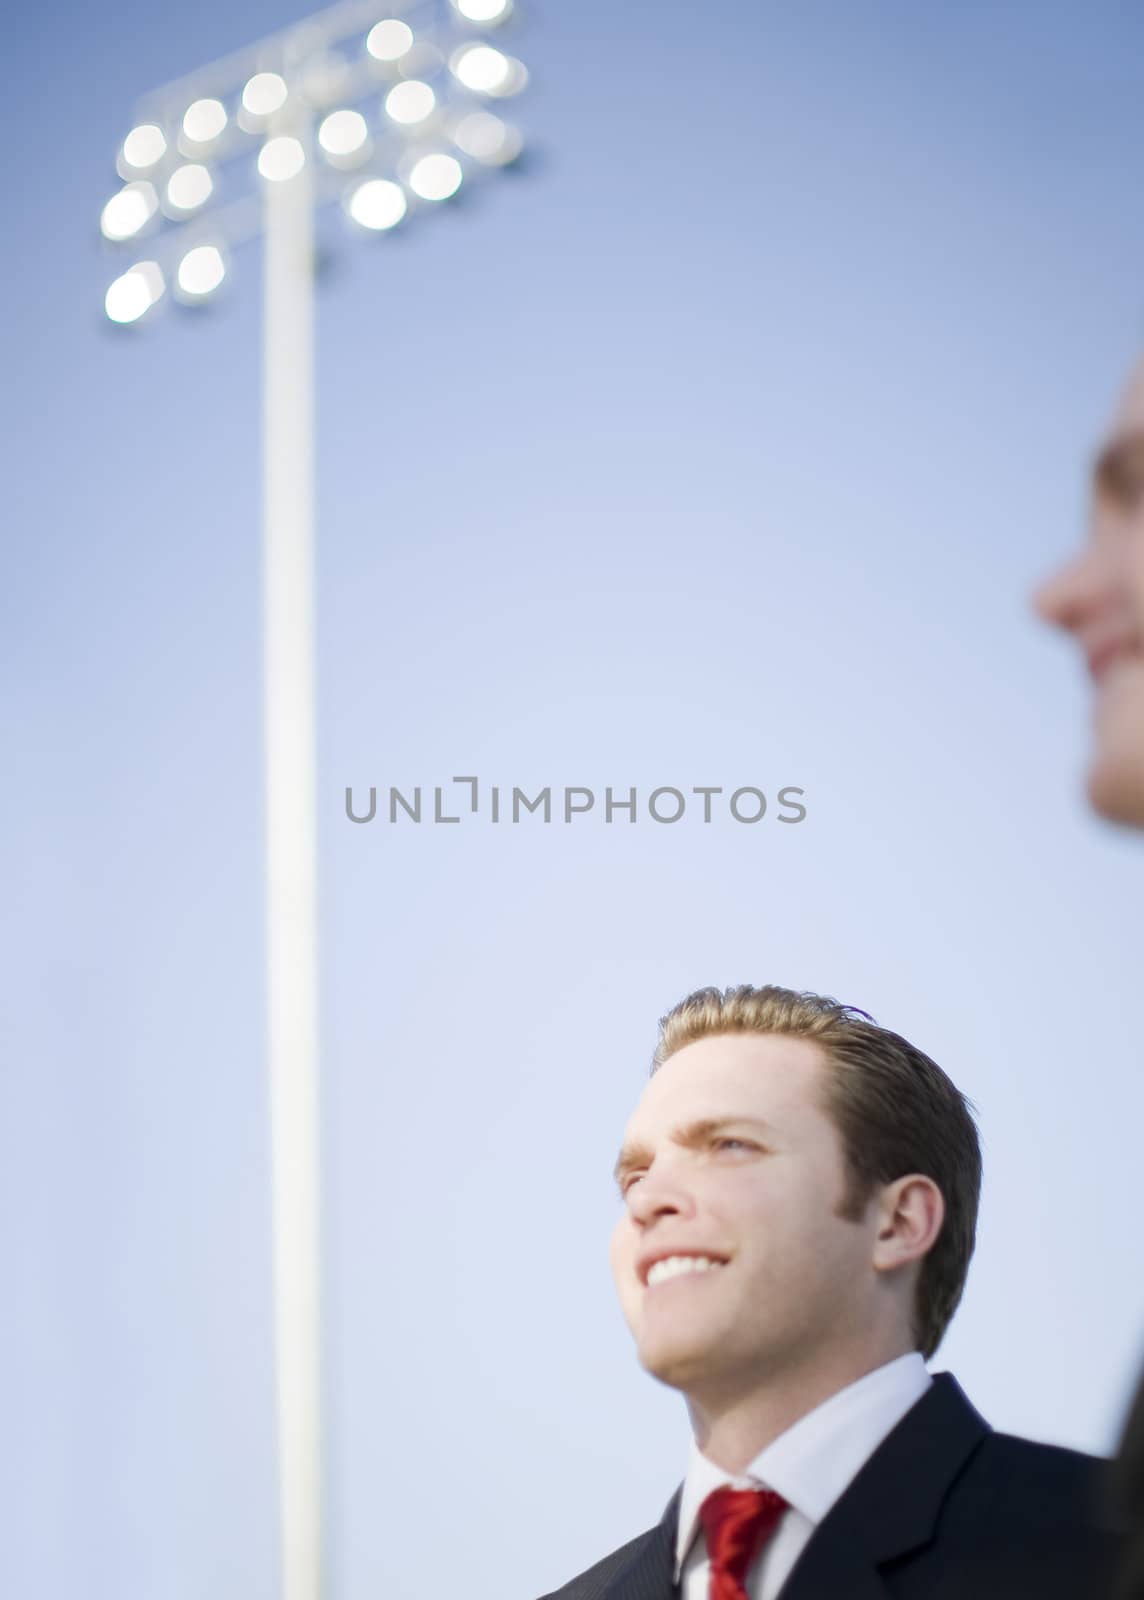 two business people smiling outside standing in a stadium with large lights in the bacground under a blue sky